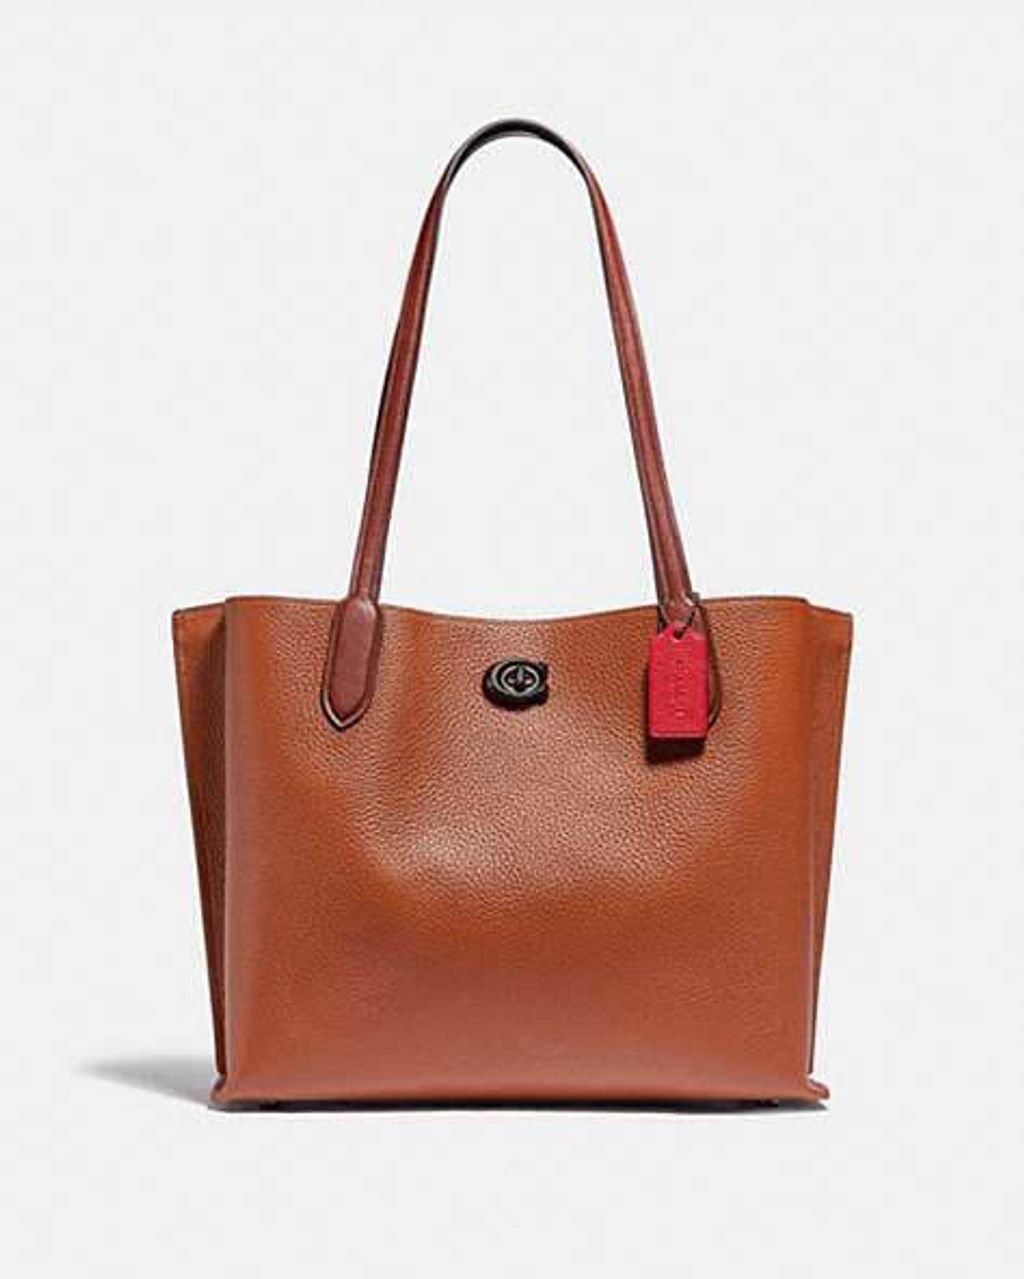 handbagbranded.com getlush outlet personalshopper usa malaysia ready stock coach malaysia Coach Willow Colorblock Leather